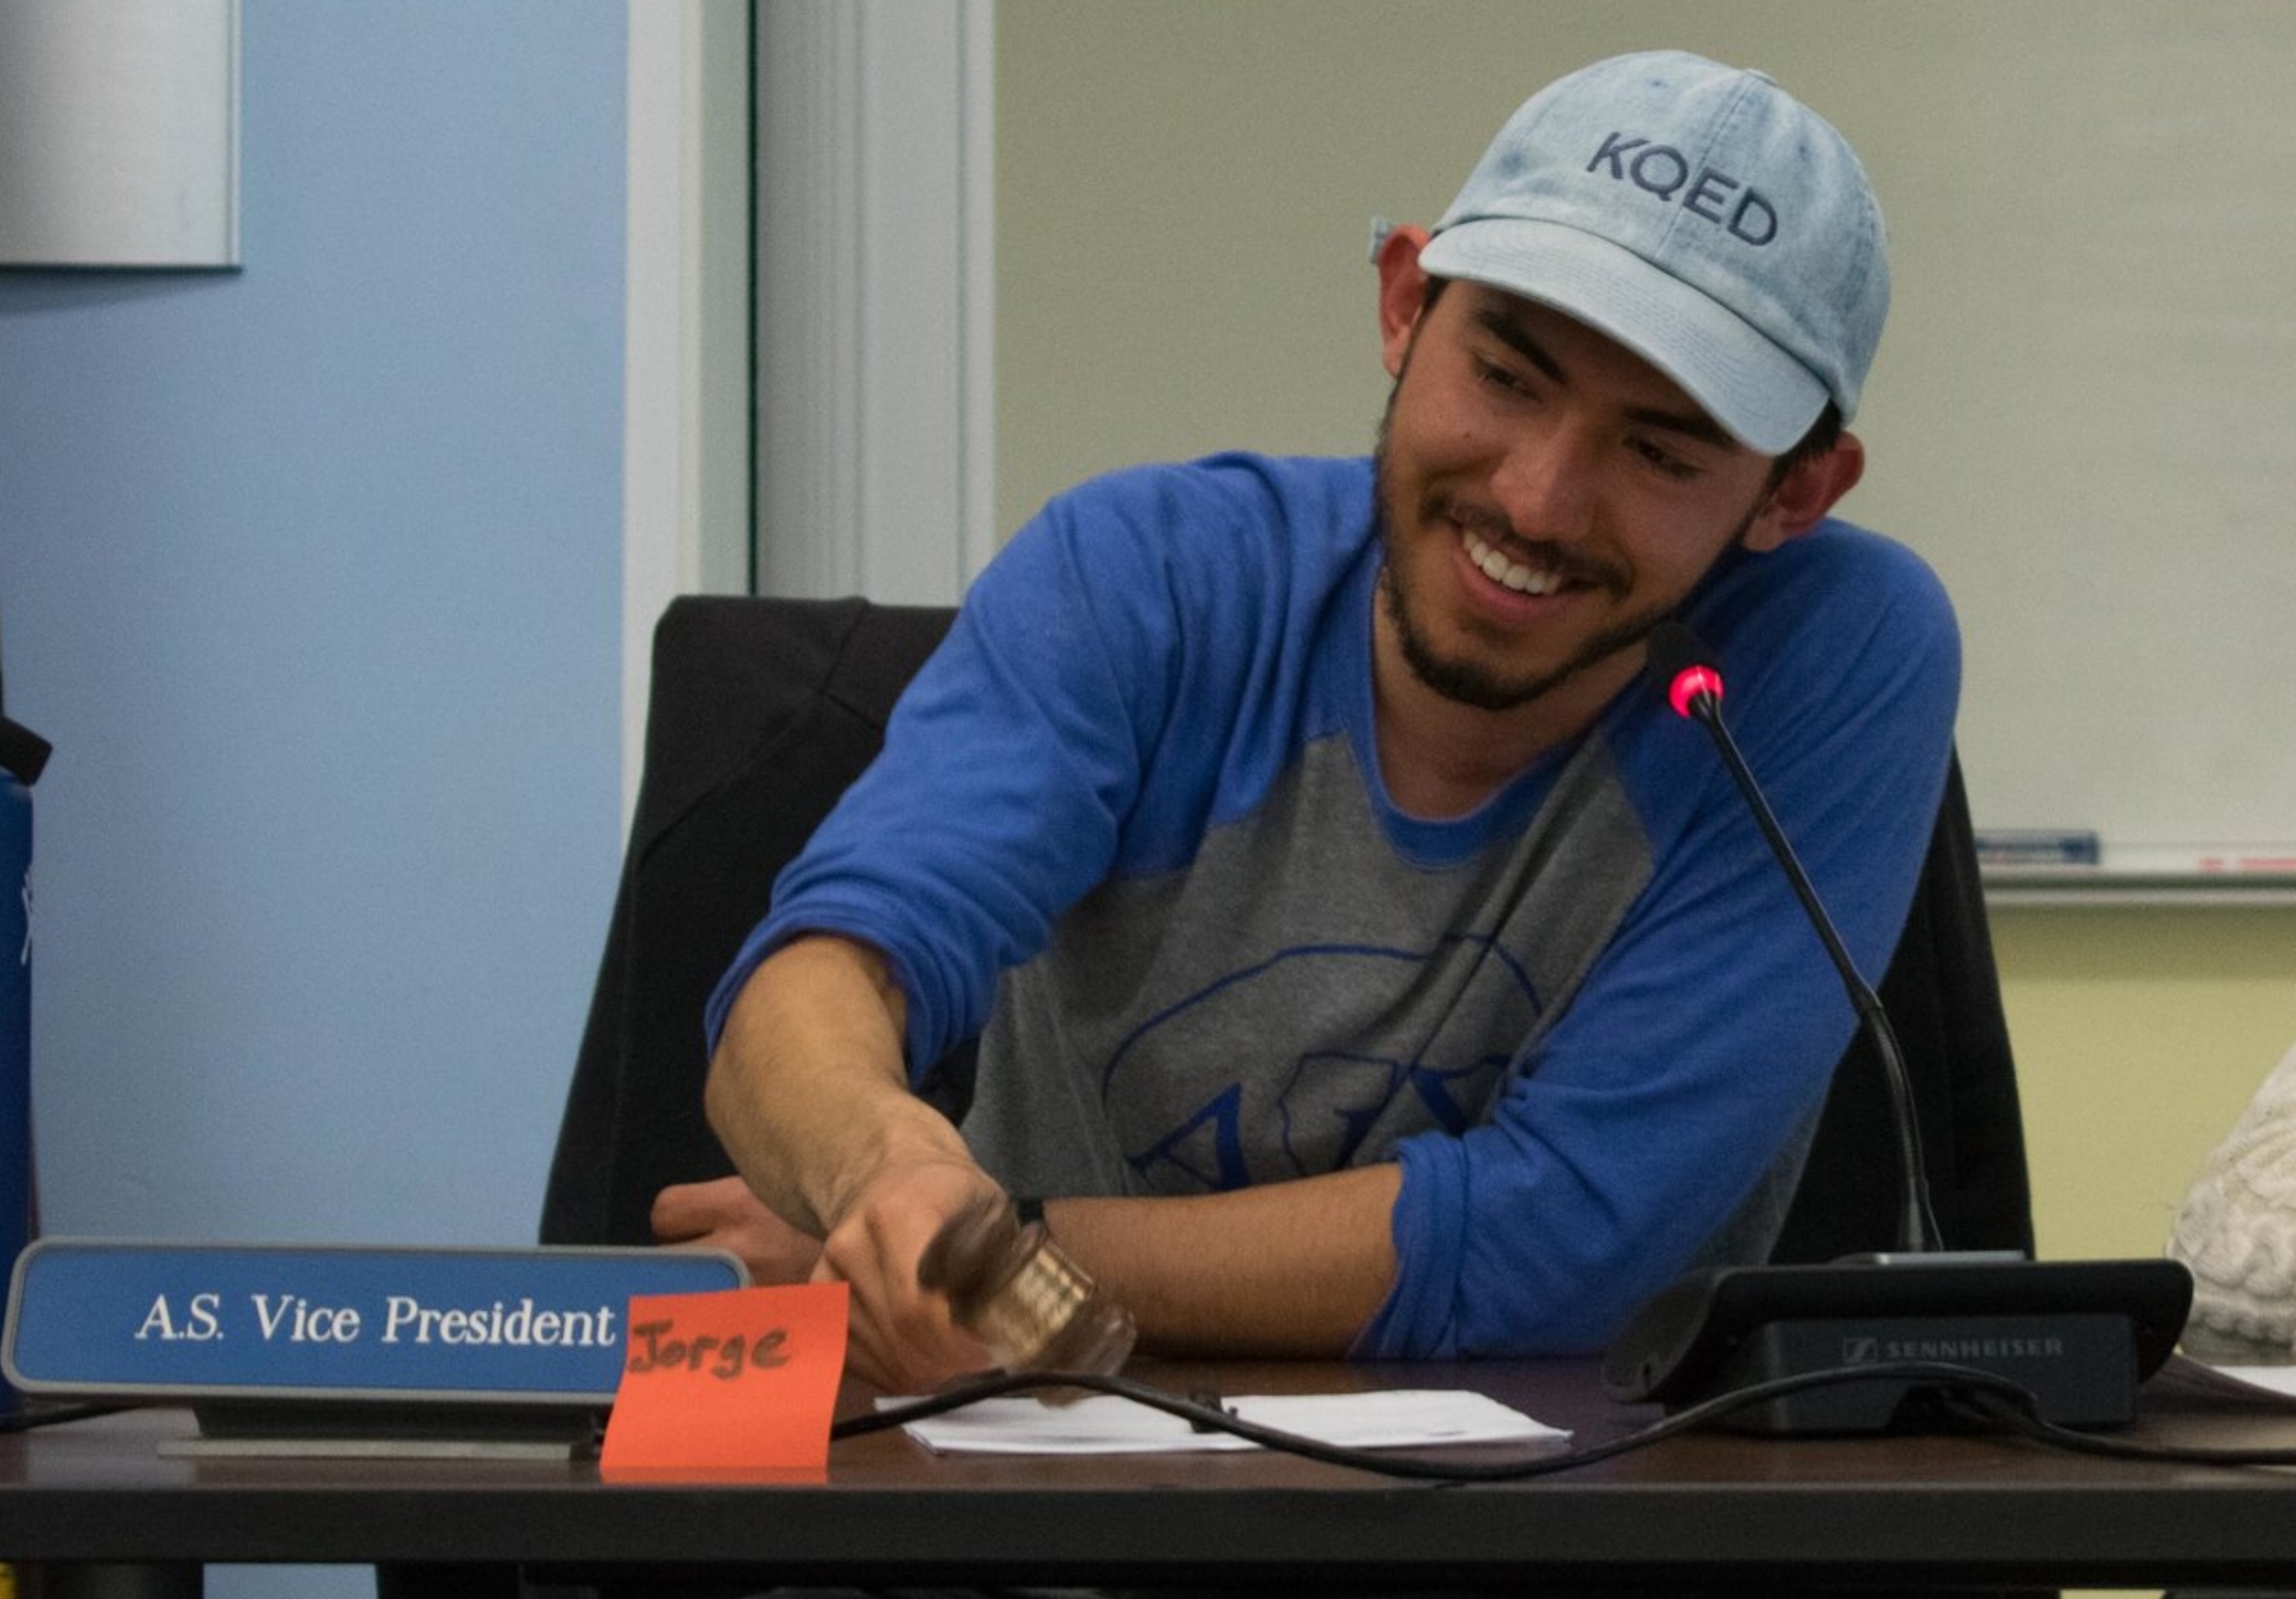  Jorge Sandoval, the Vice President for the Associated Students of Santa Monica College adjourns the latest meeting at 3:26 p.m. in Santa Monica, California on Monday, March 19.&nbsp;This meeting was Sandoval’s first official meeting as vice presiden